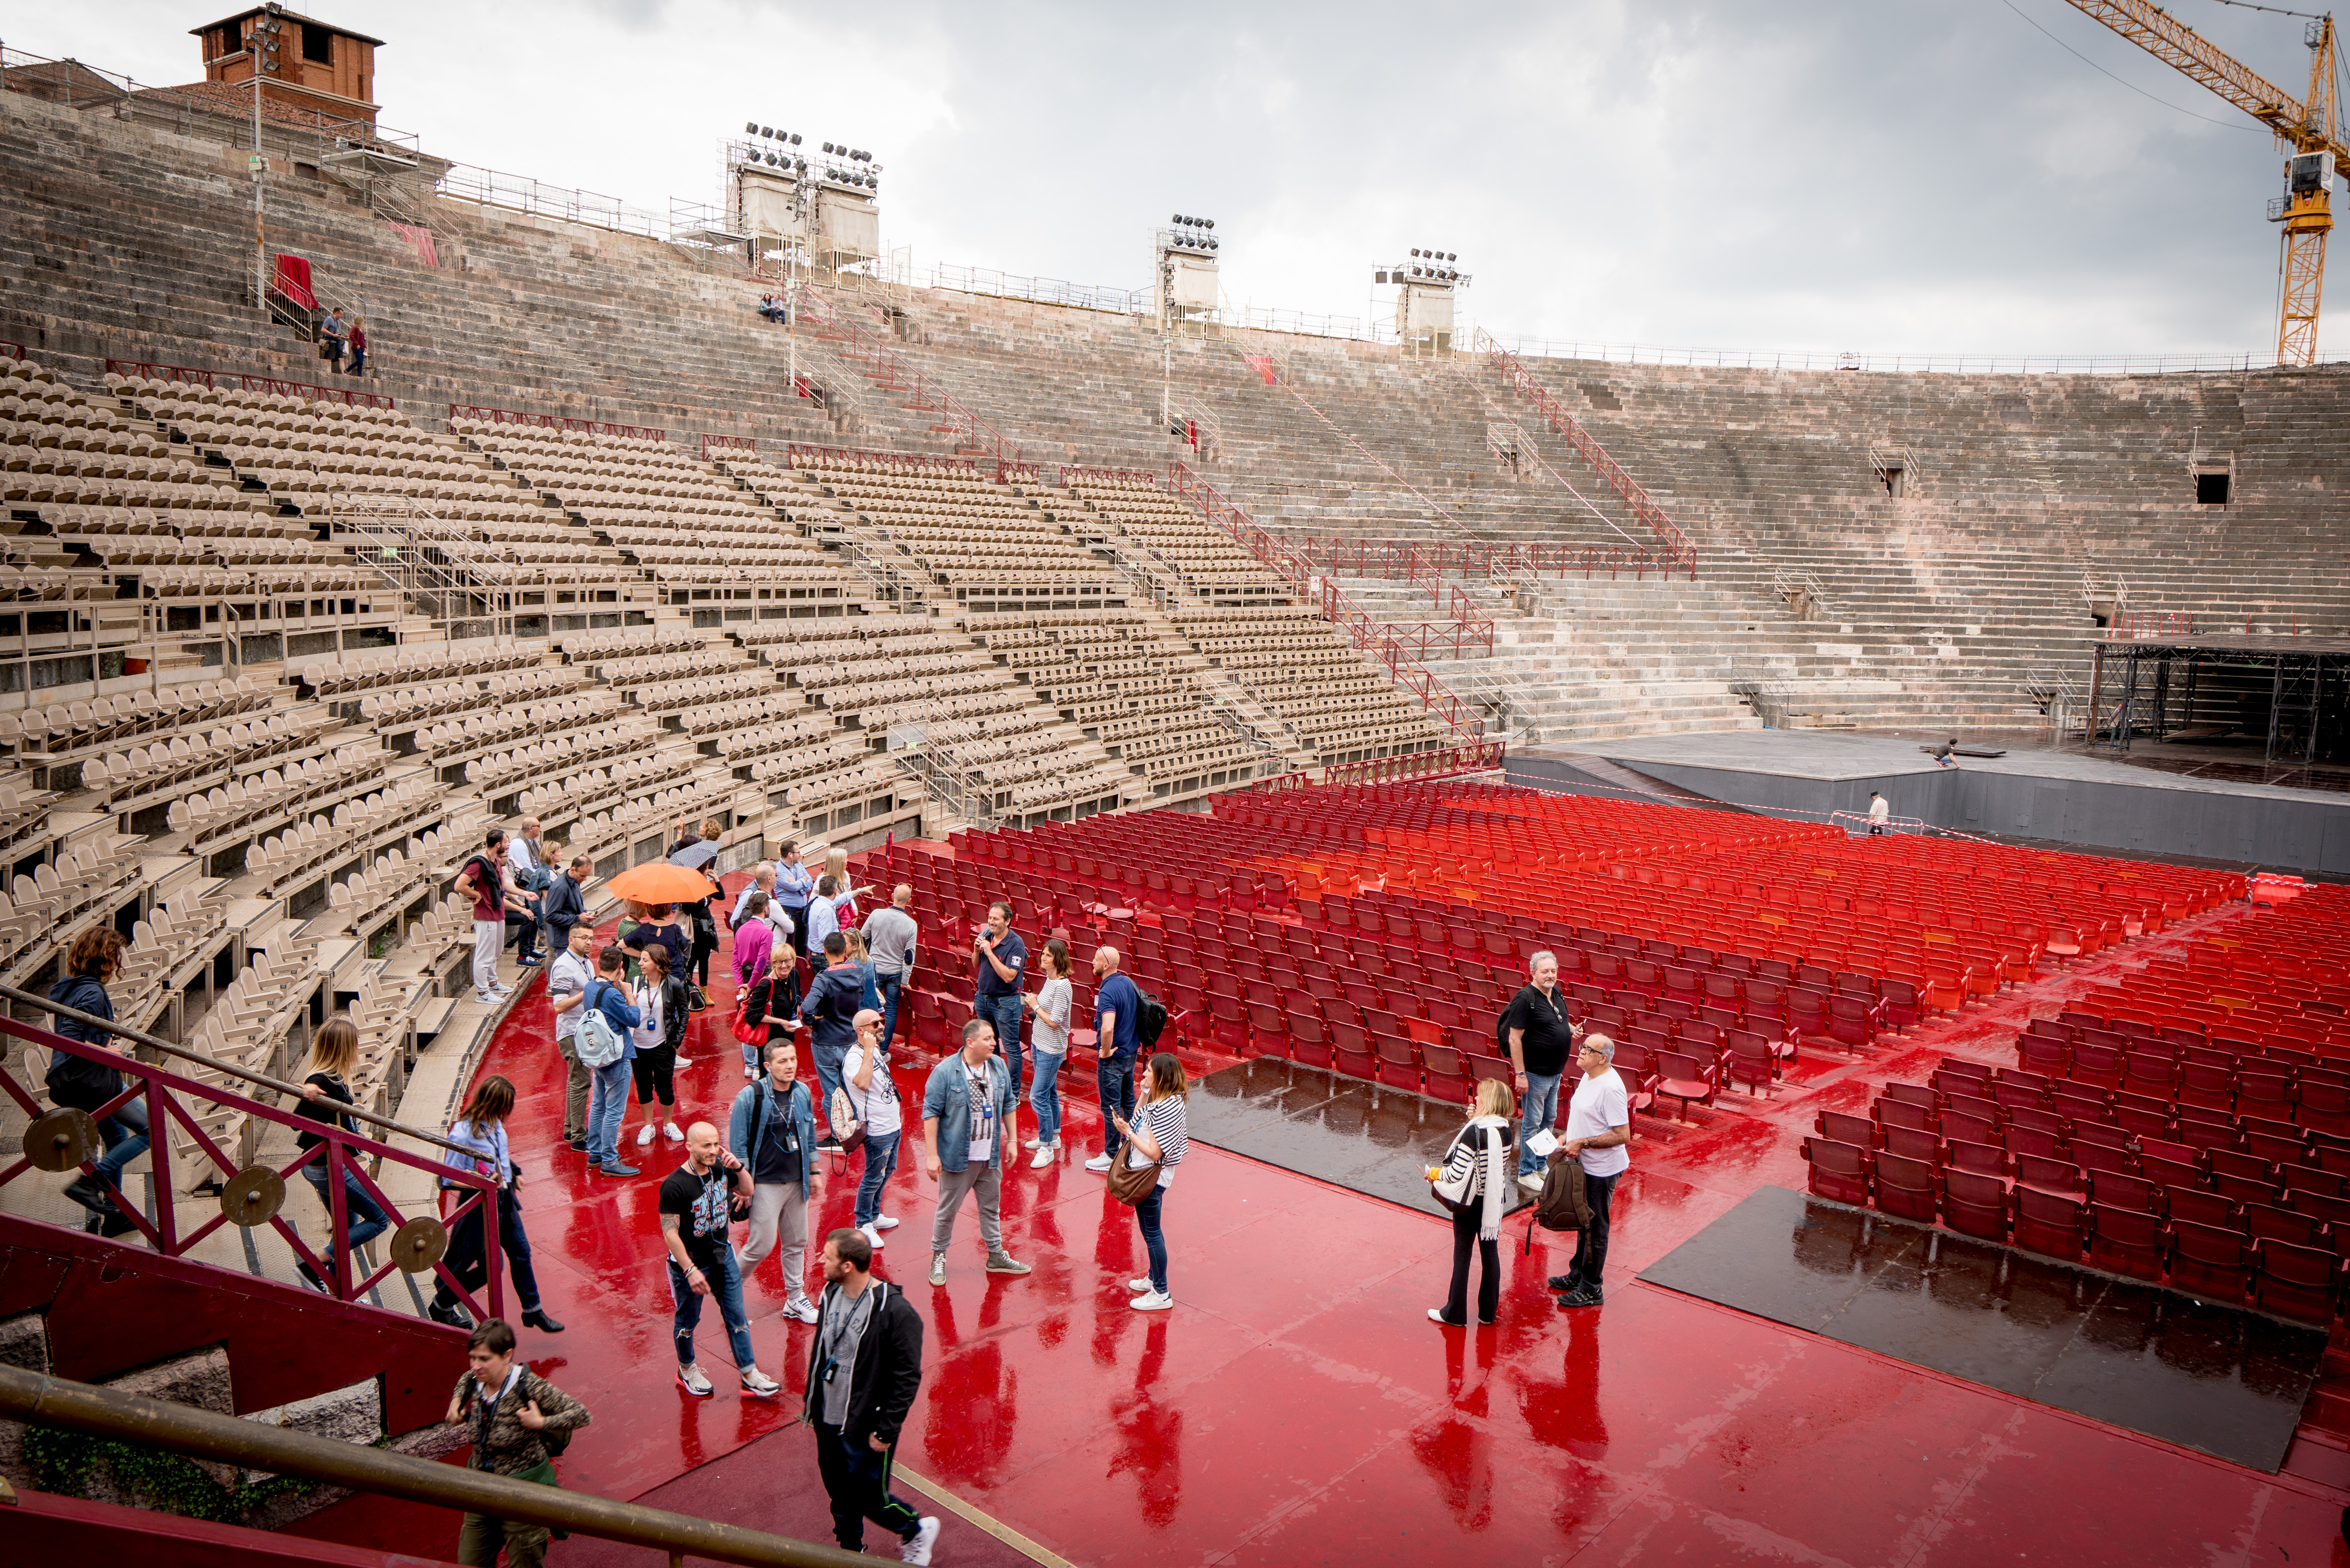 Convention-visita-arena-verona-events-in-out